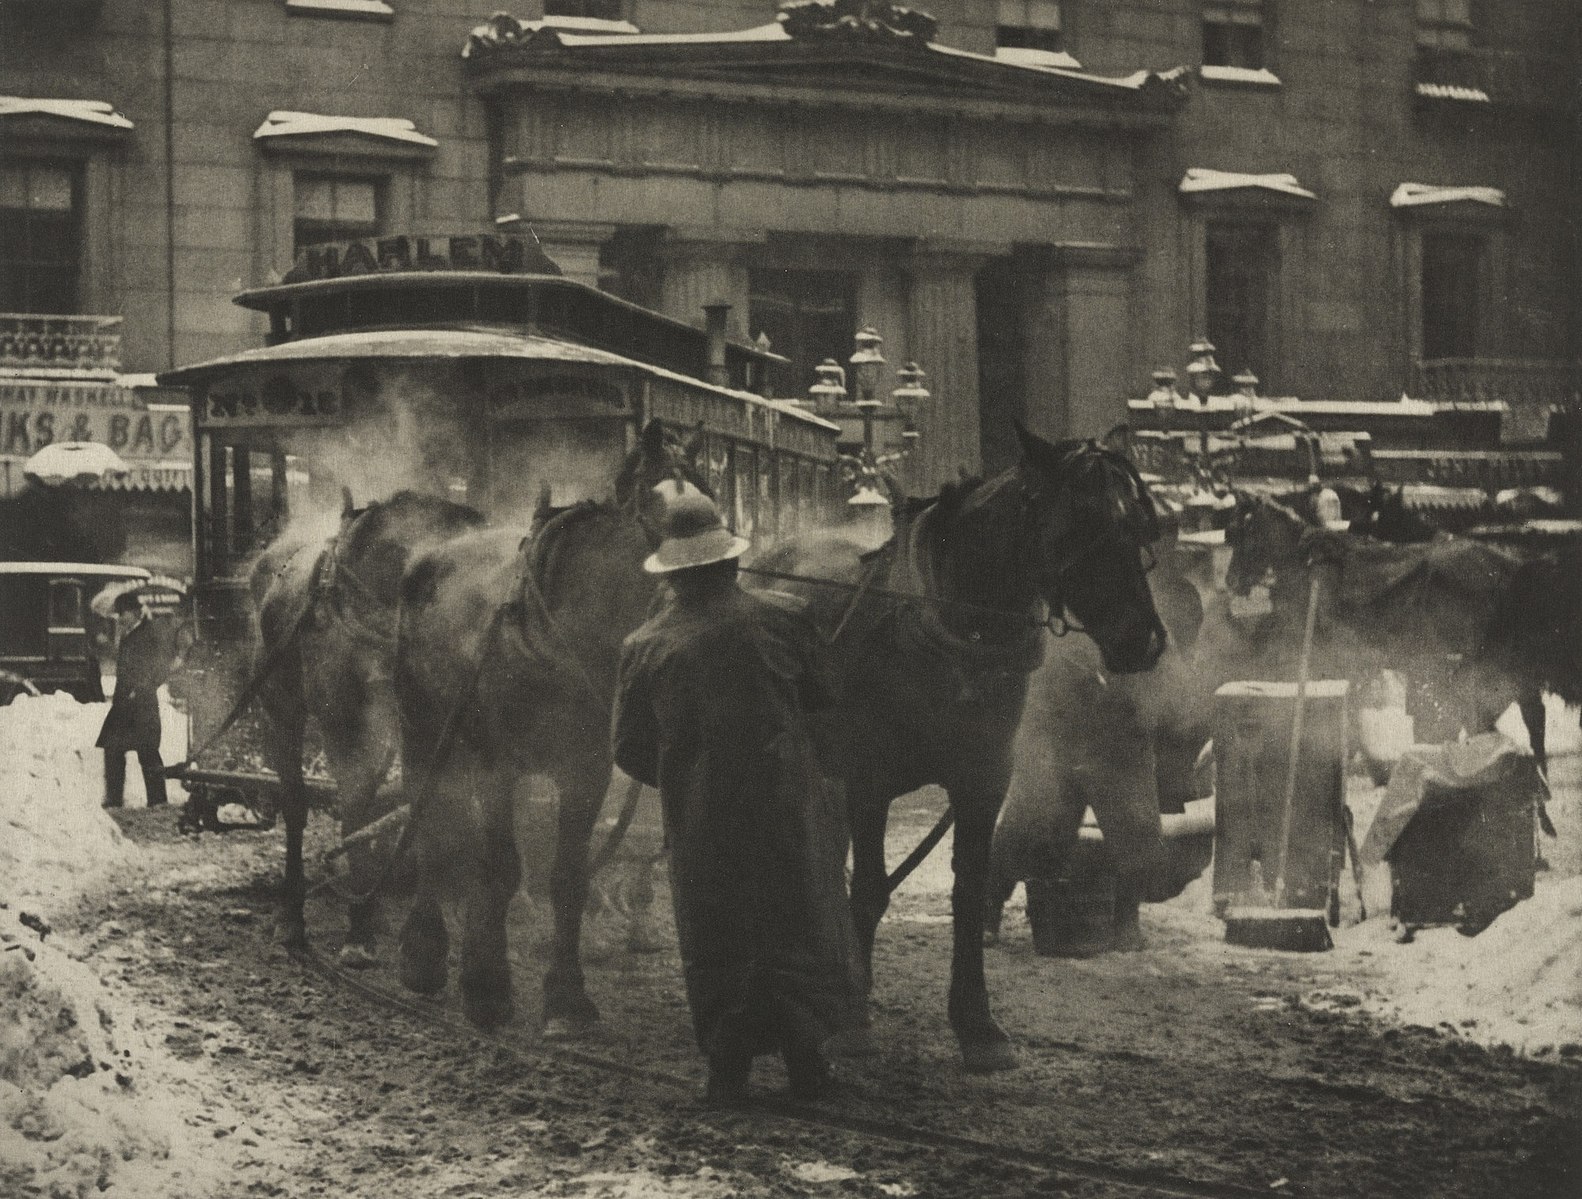 A photograph of horses pulling trollys in a city scene